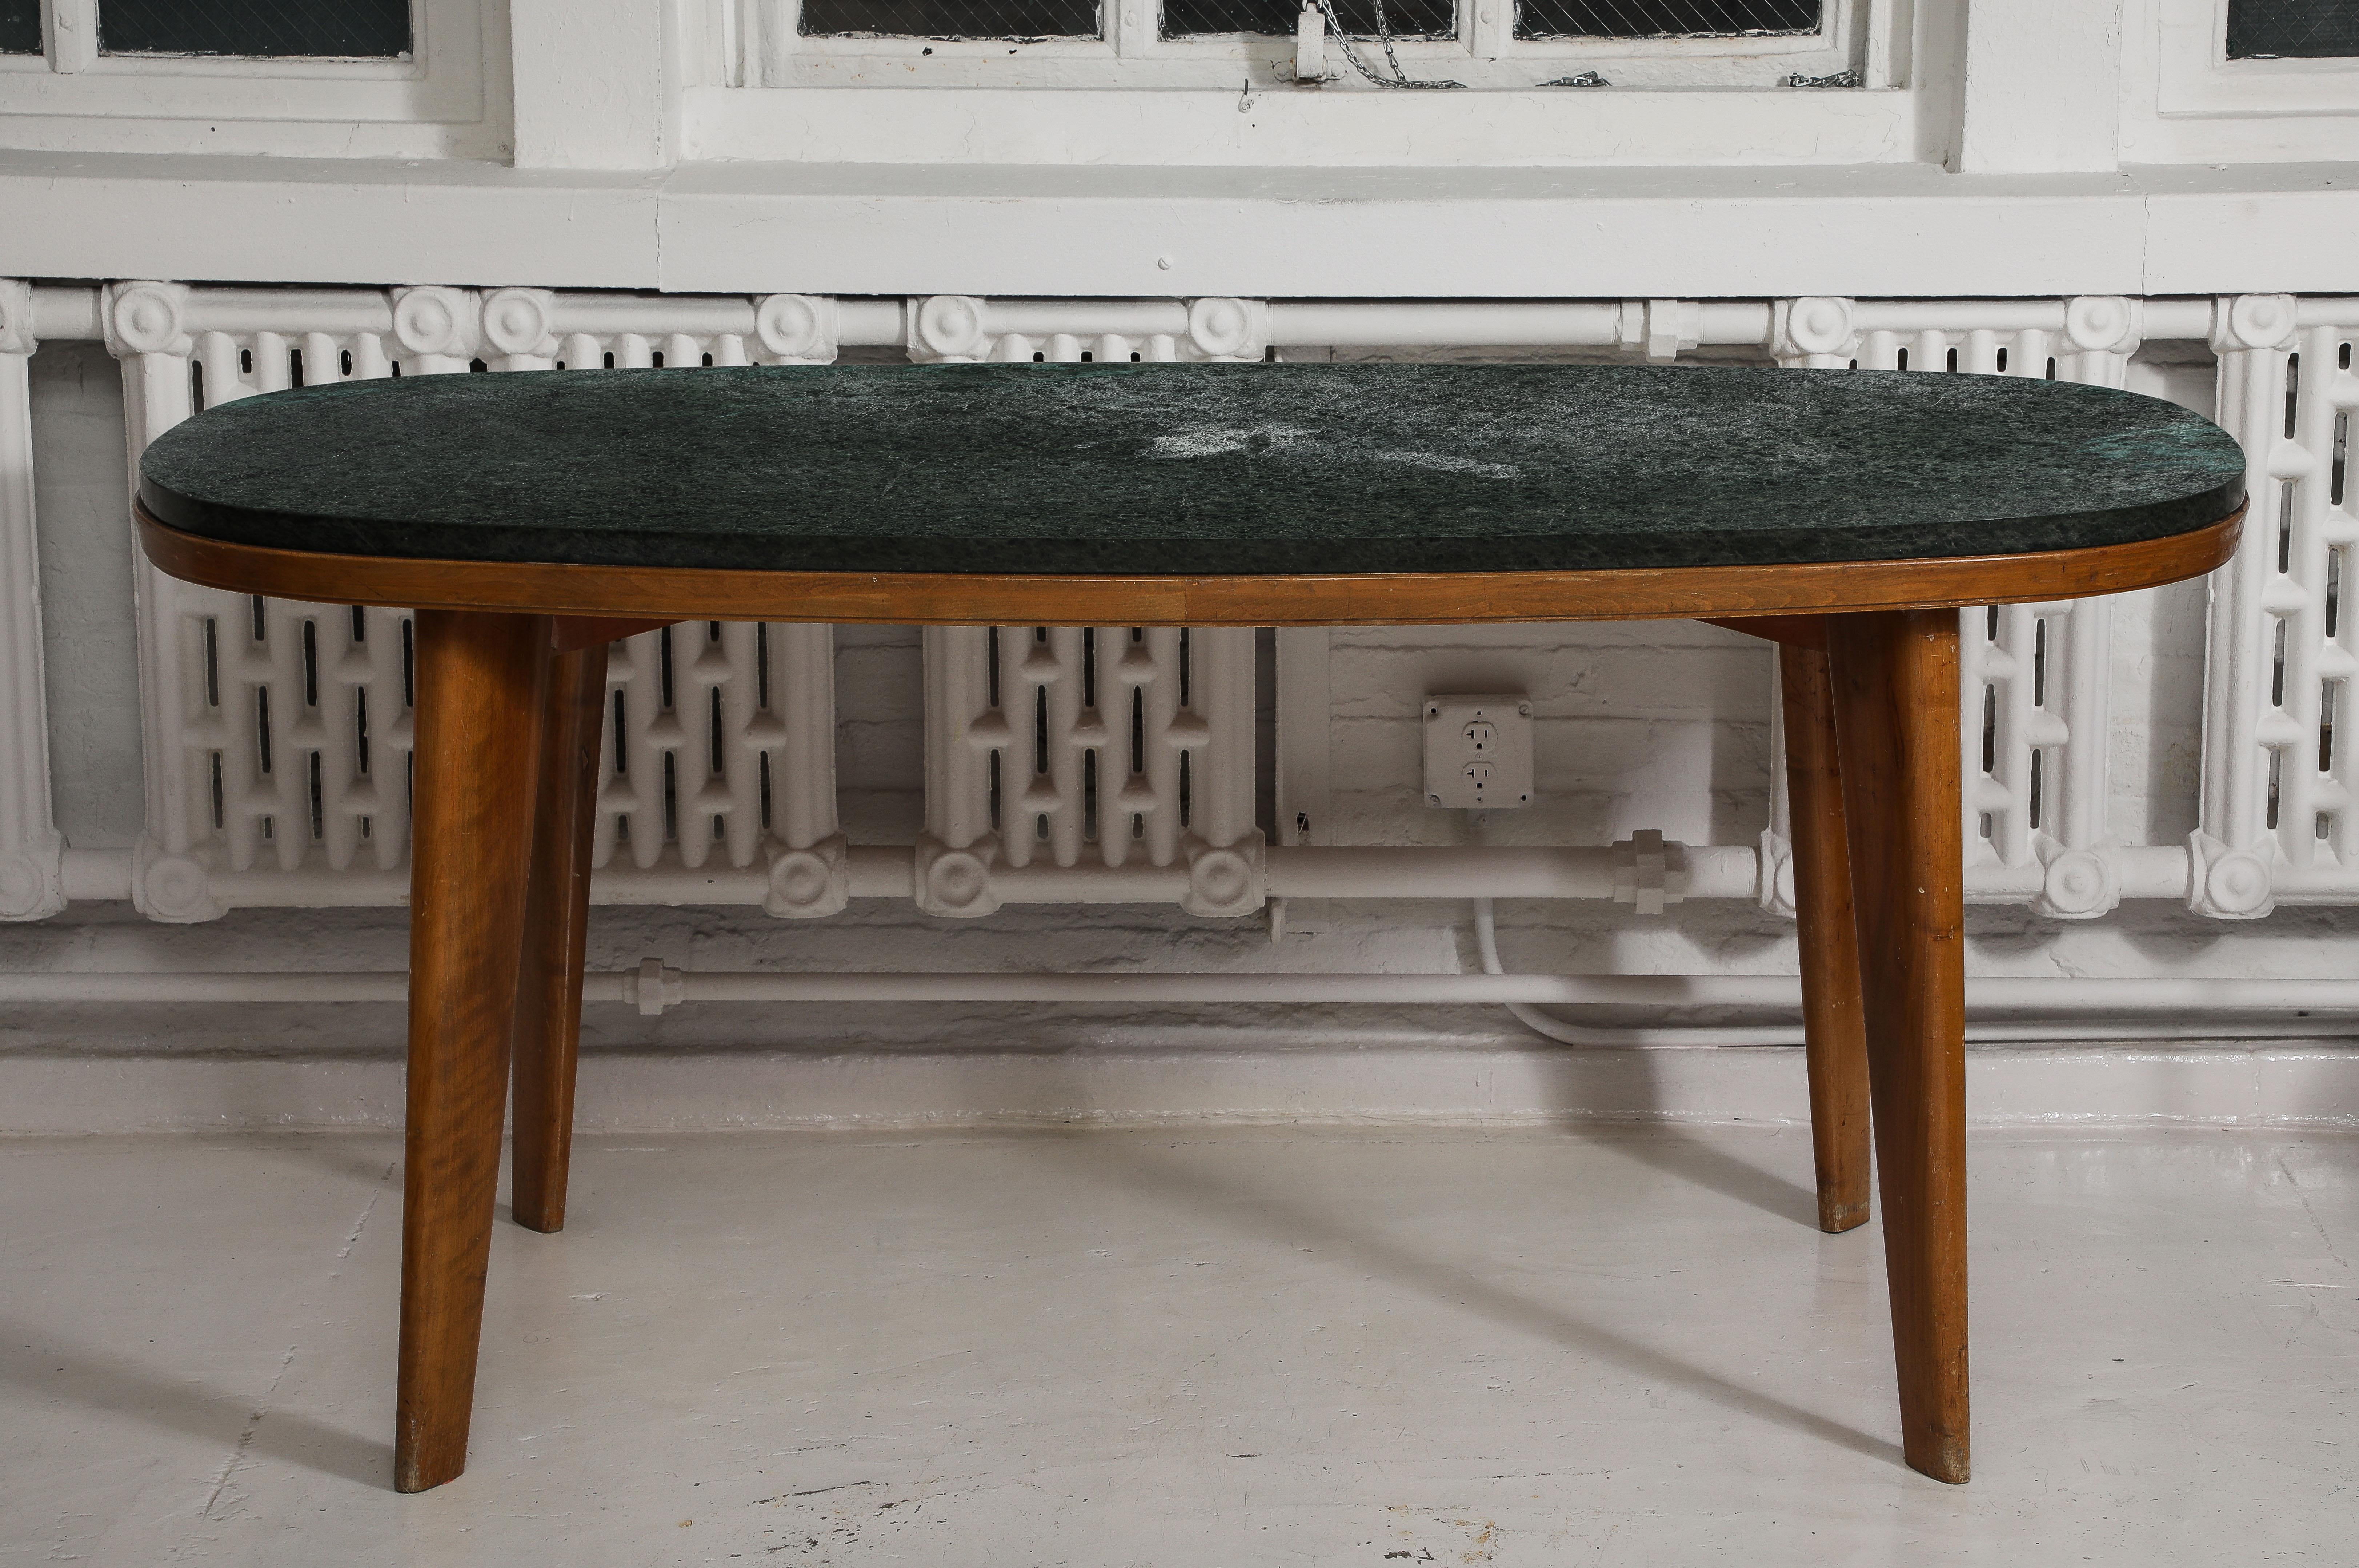 Excellent shape for dining, entry table or desk. 

Lovely patina. 